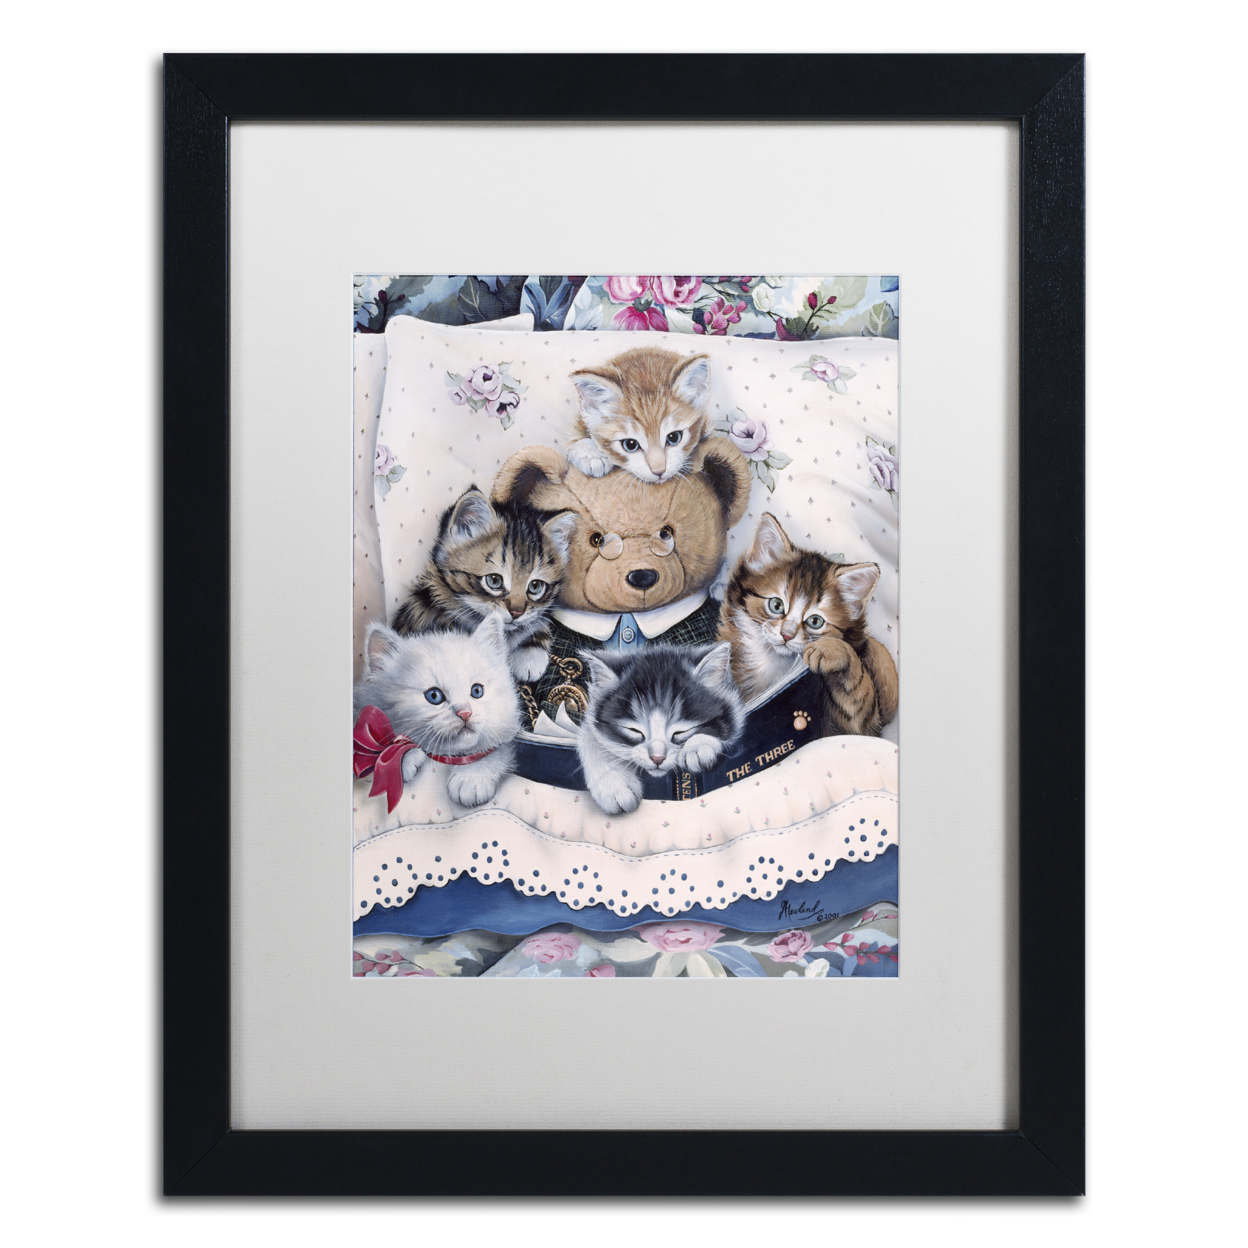 Jenny Newland 'Kittens And Teddy Bear' Black Wooden Framed Art 18 X 22 Inches